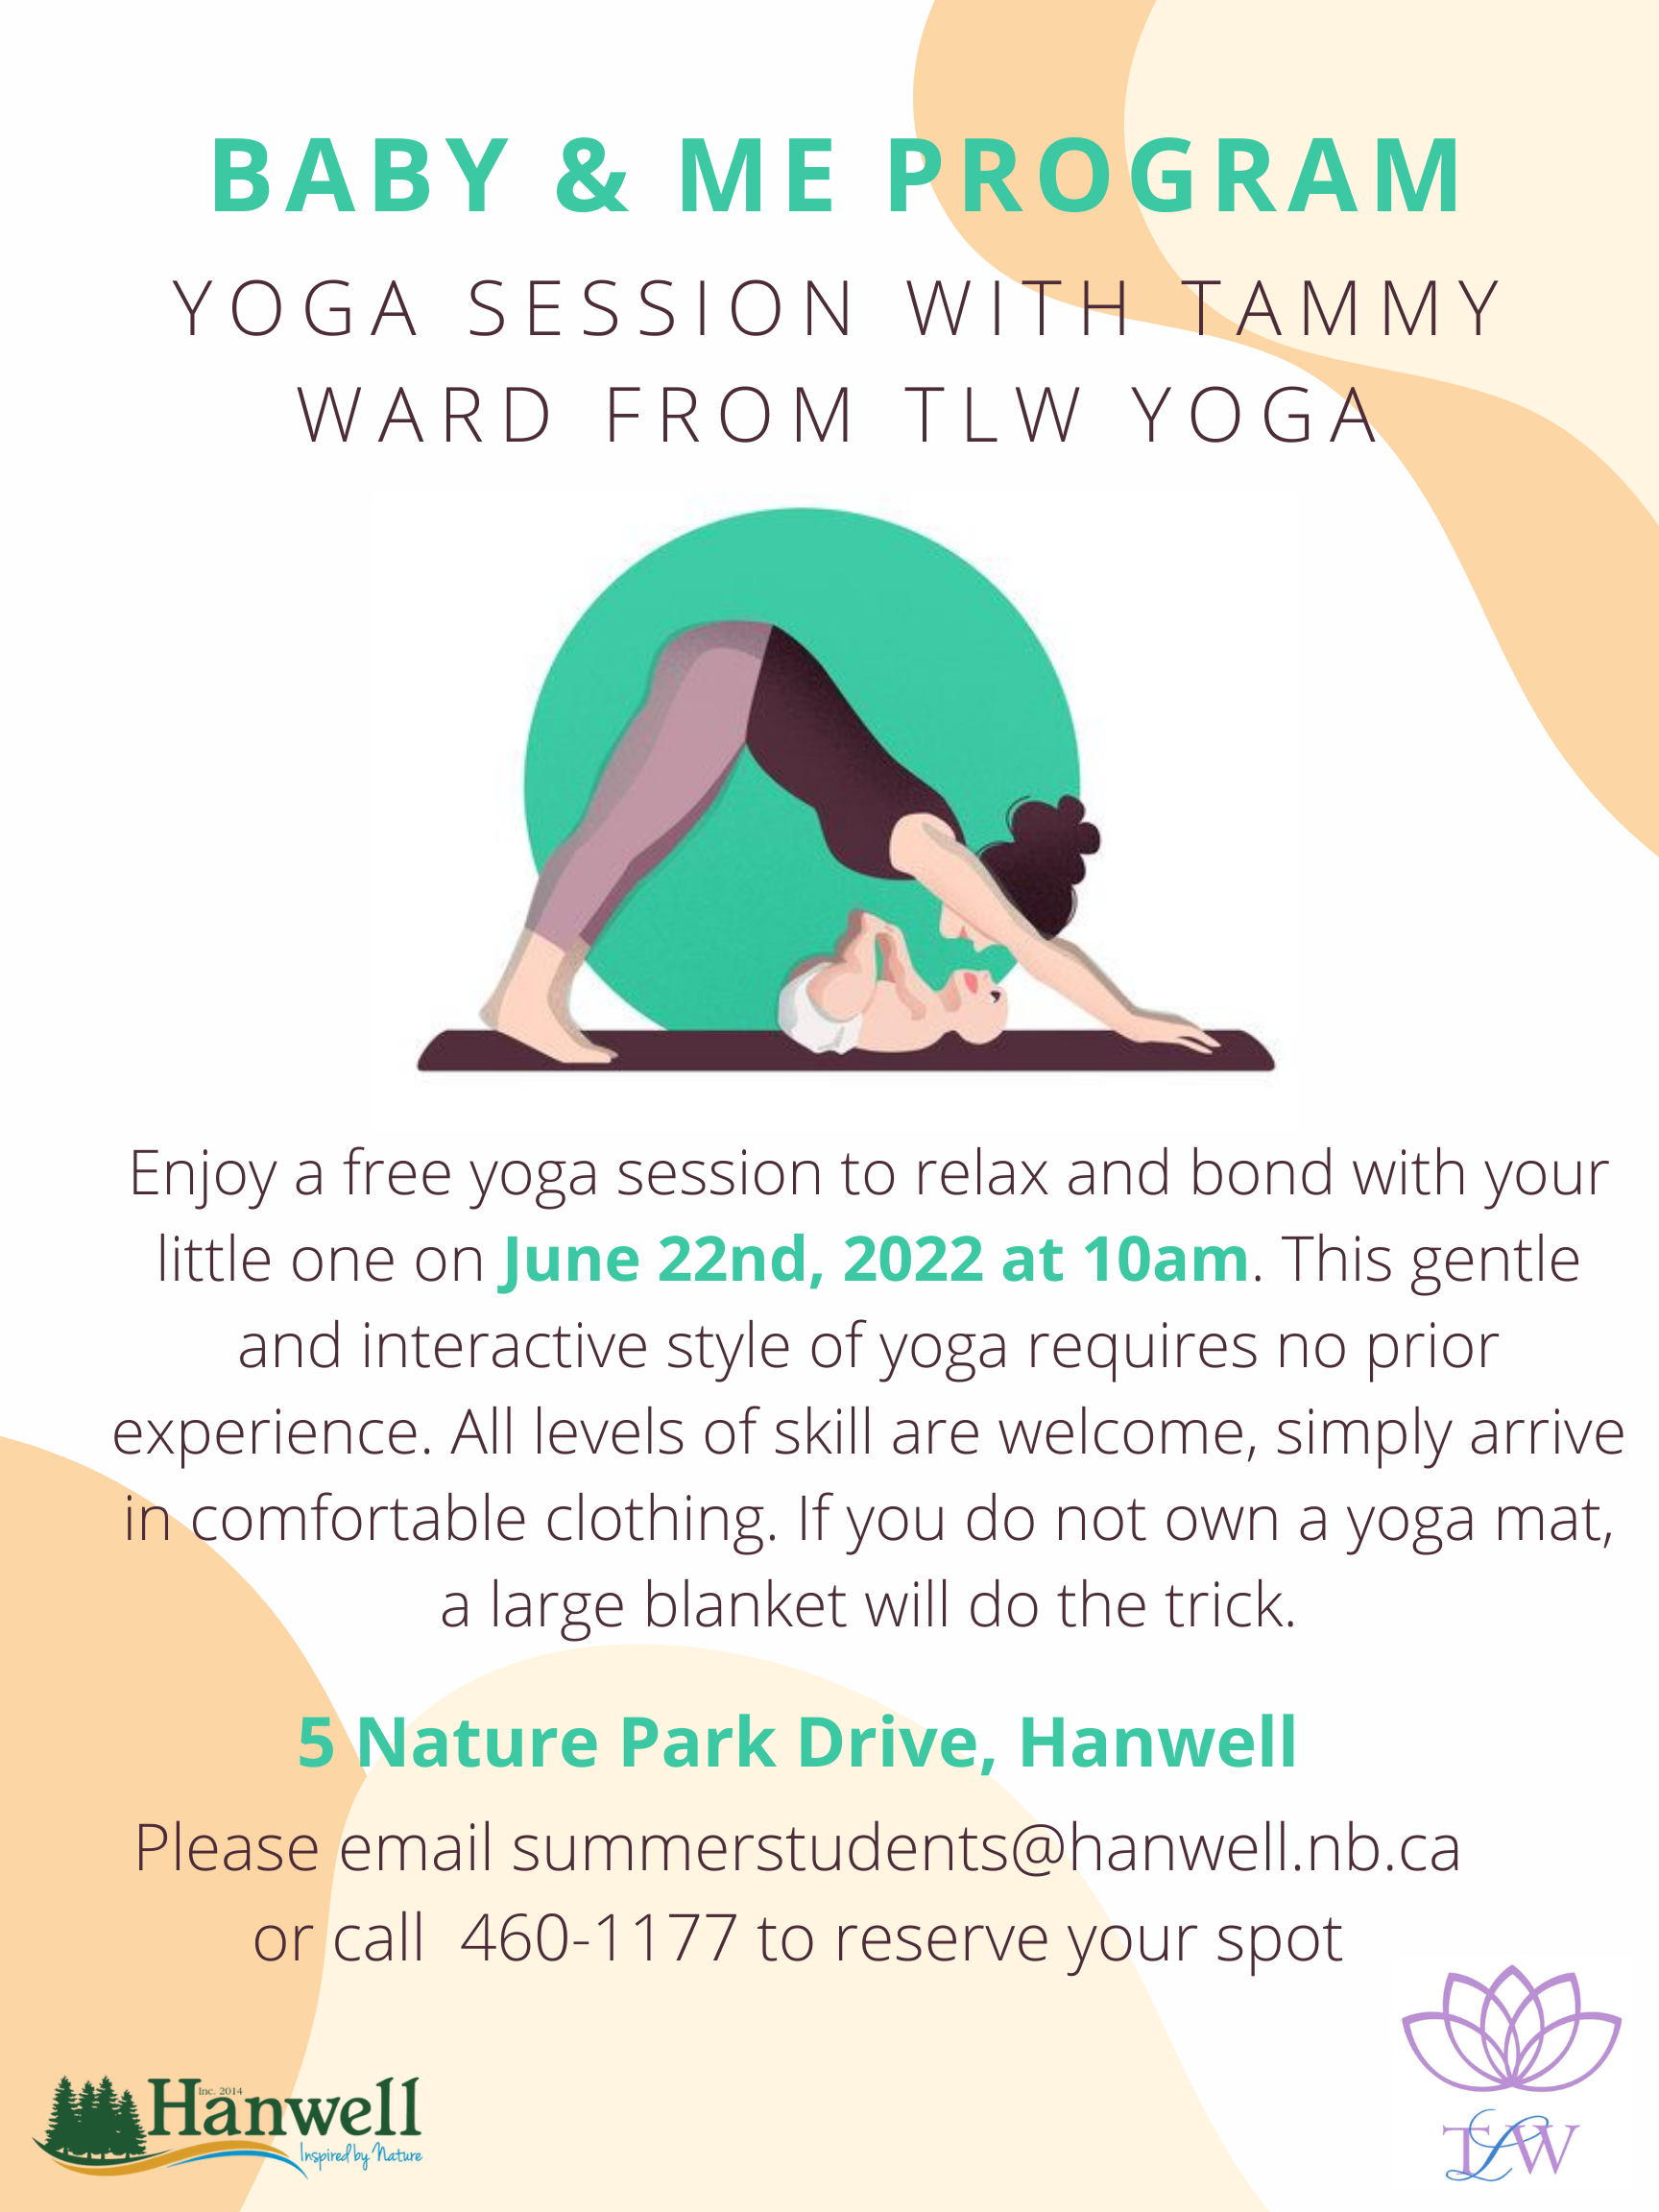 https://hanwell.nb.ca/wp-content/uploads/2022/06/Baby-Me-Yoga-1.png